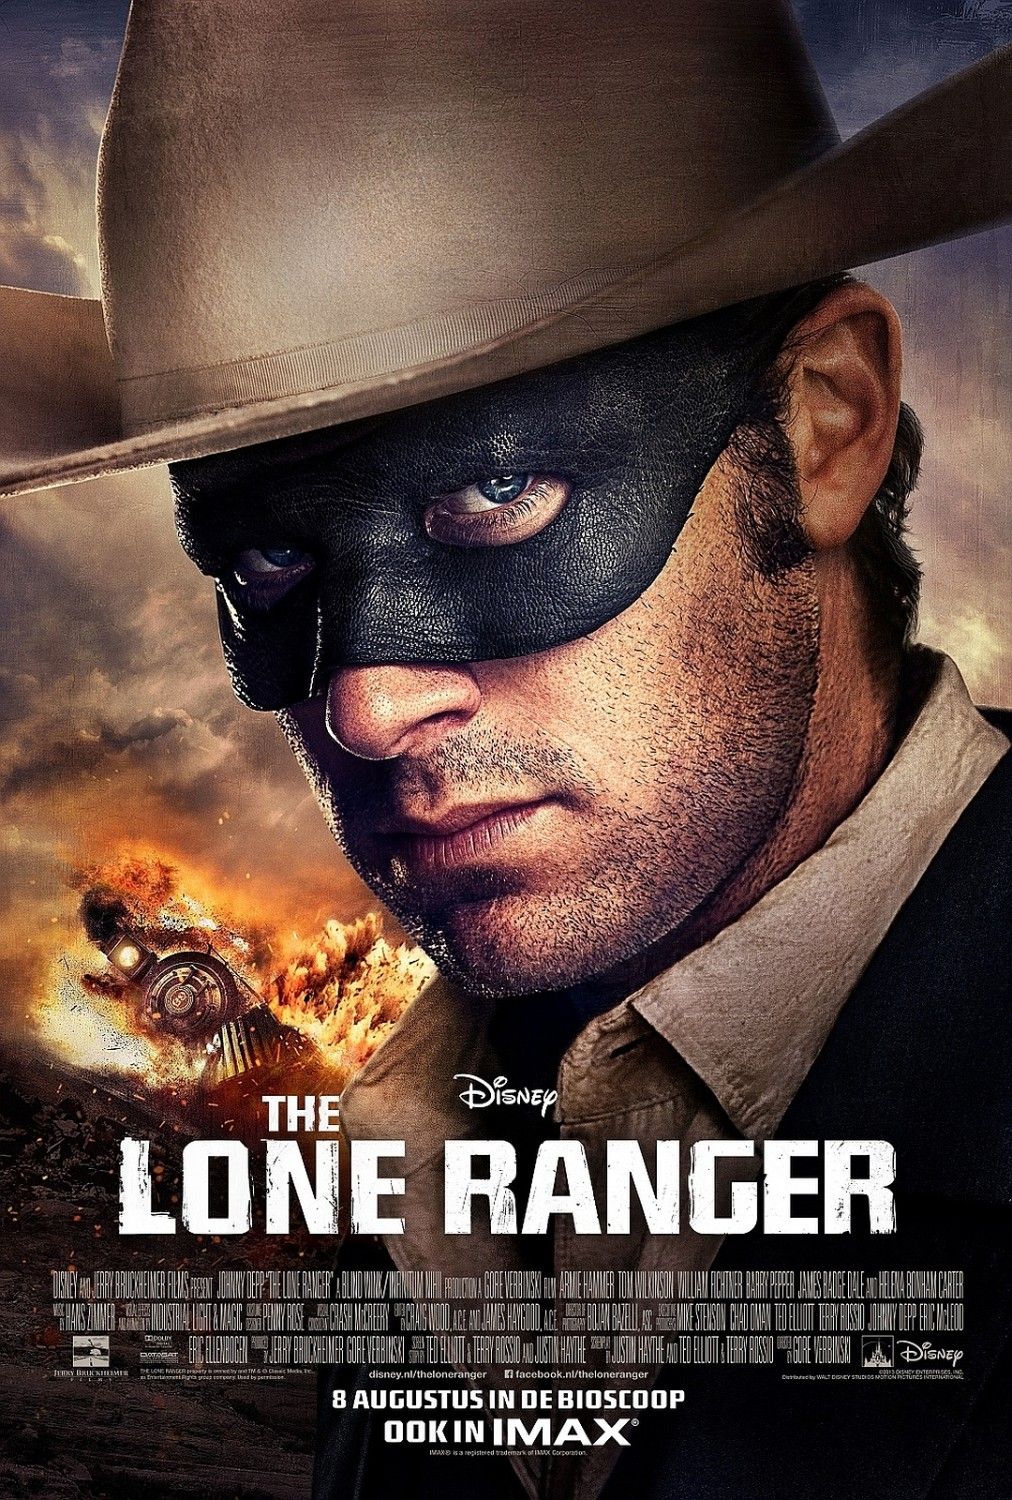 The Lone Ranger Character Poster 1